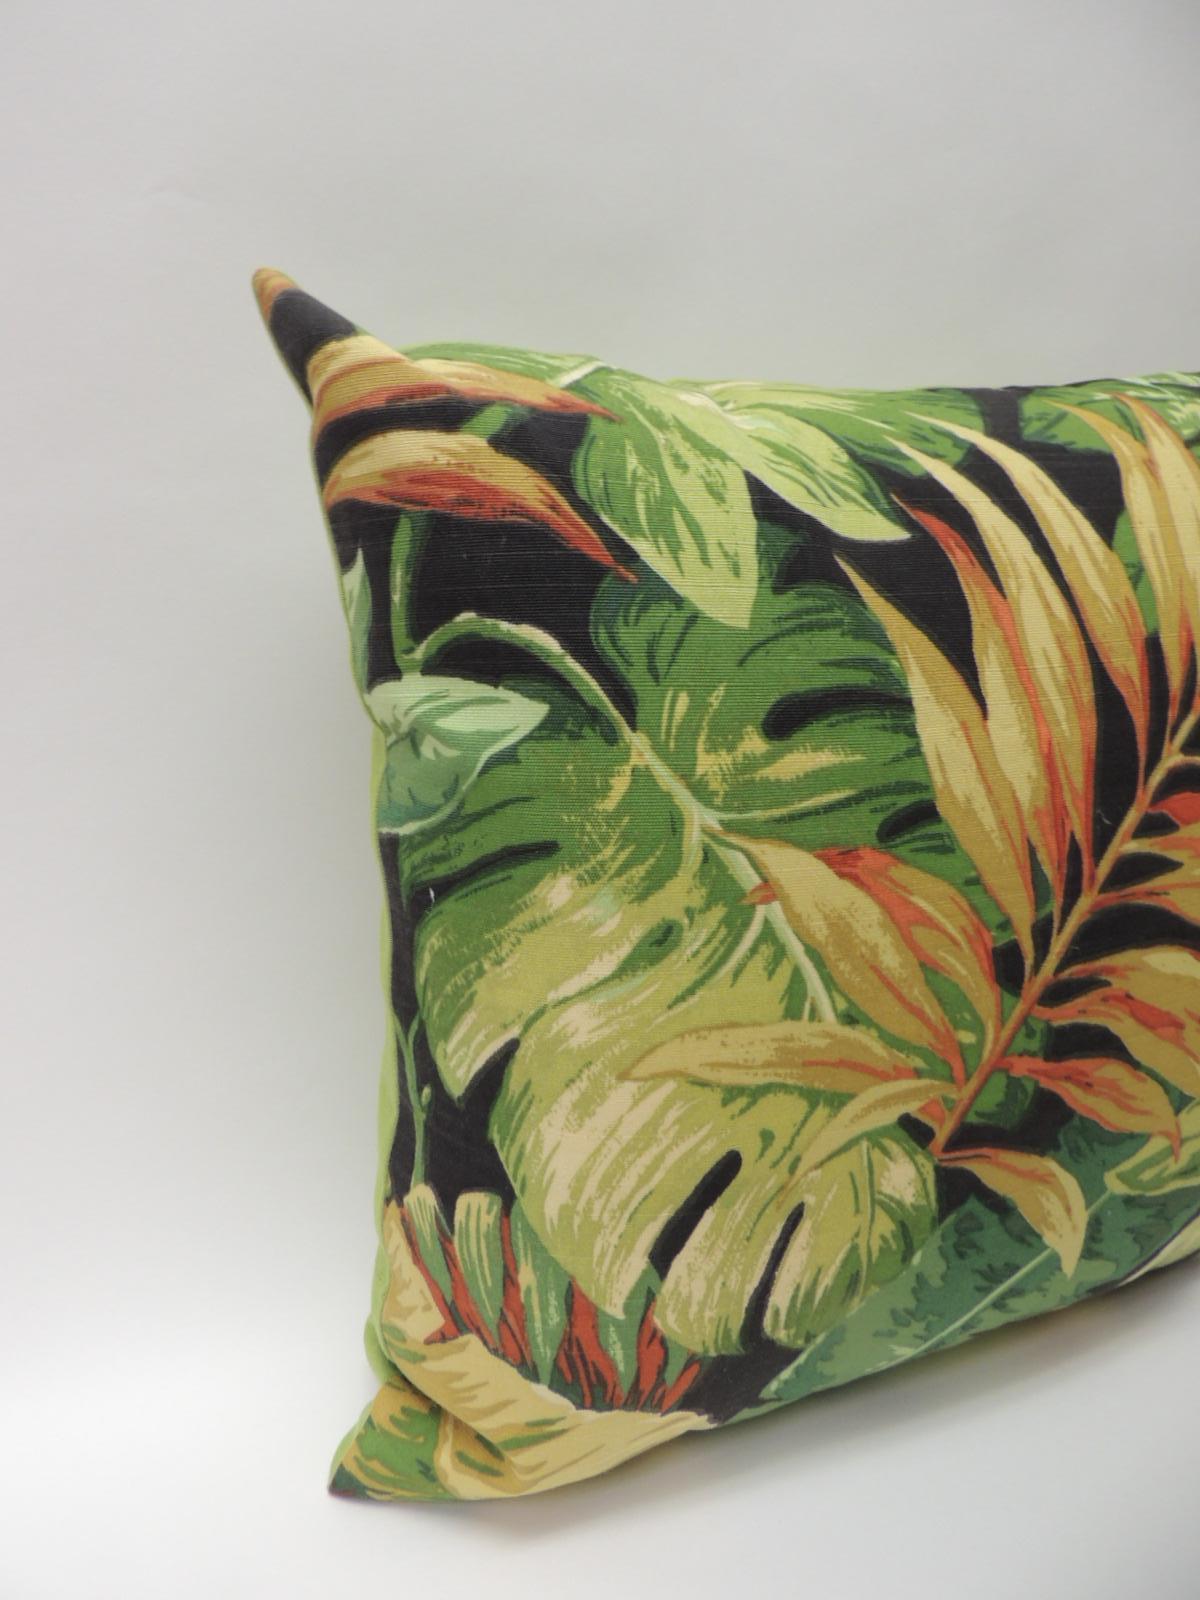 Pair of tropical design printed pillows, in shades of green, orange and black. Acid green backings. Palm beach Boho-chic. Throw pillows handcrafted and designed in the USA. Closure by stitch (no zipper closure) with a custom-made pillow